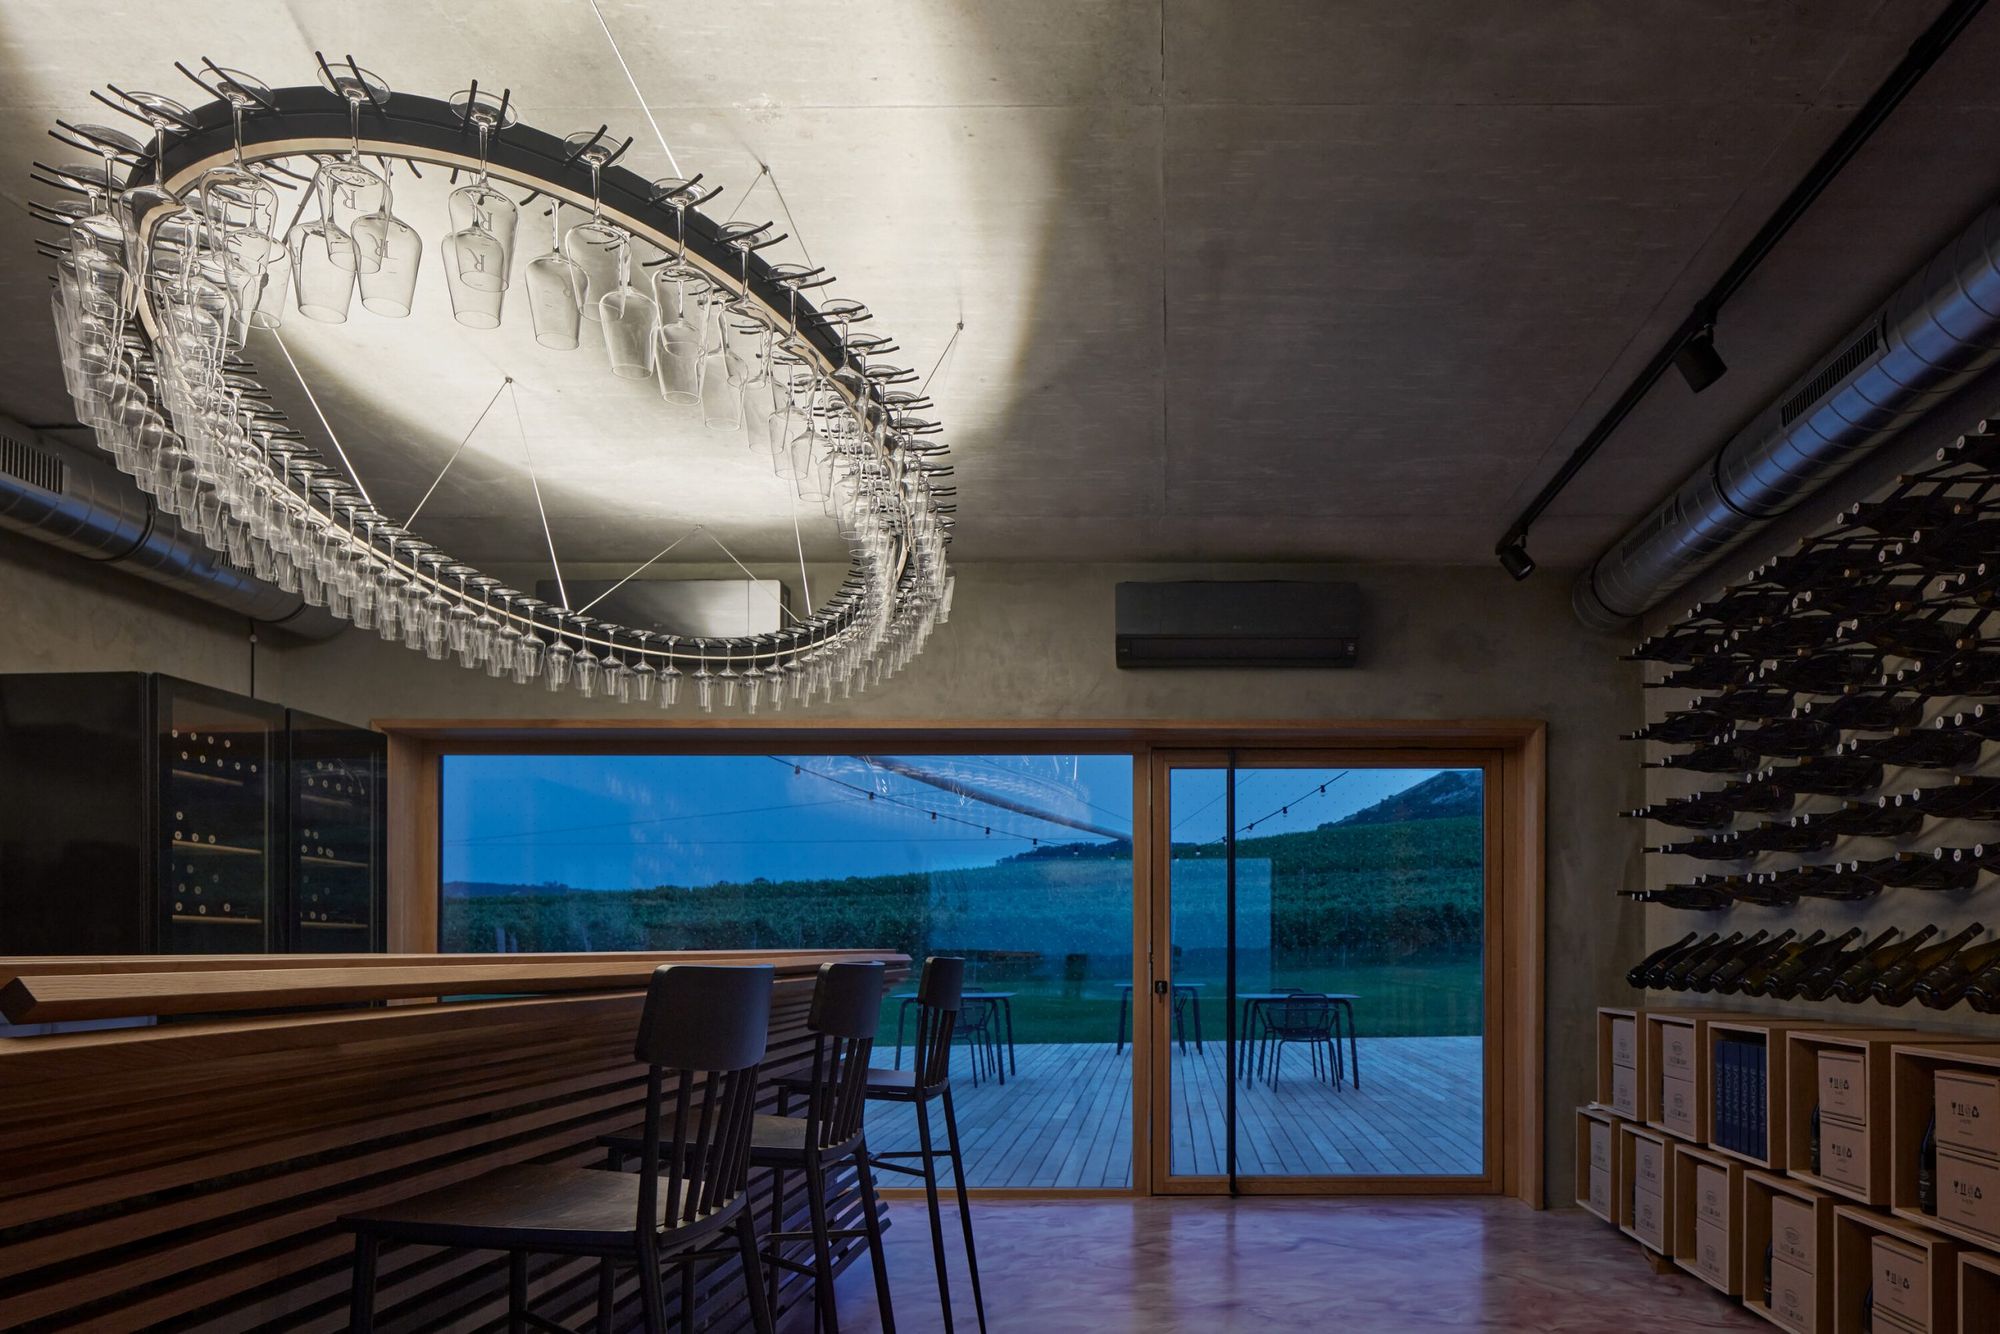 The ORA architectural studio has revived this Czech wine house